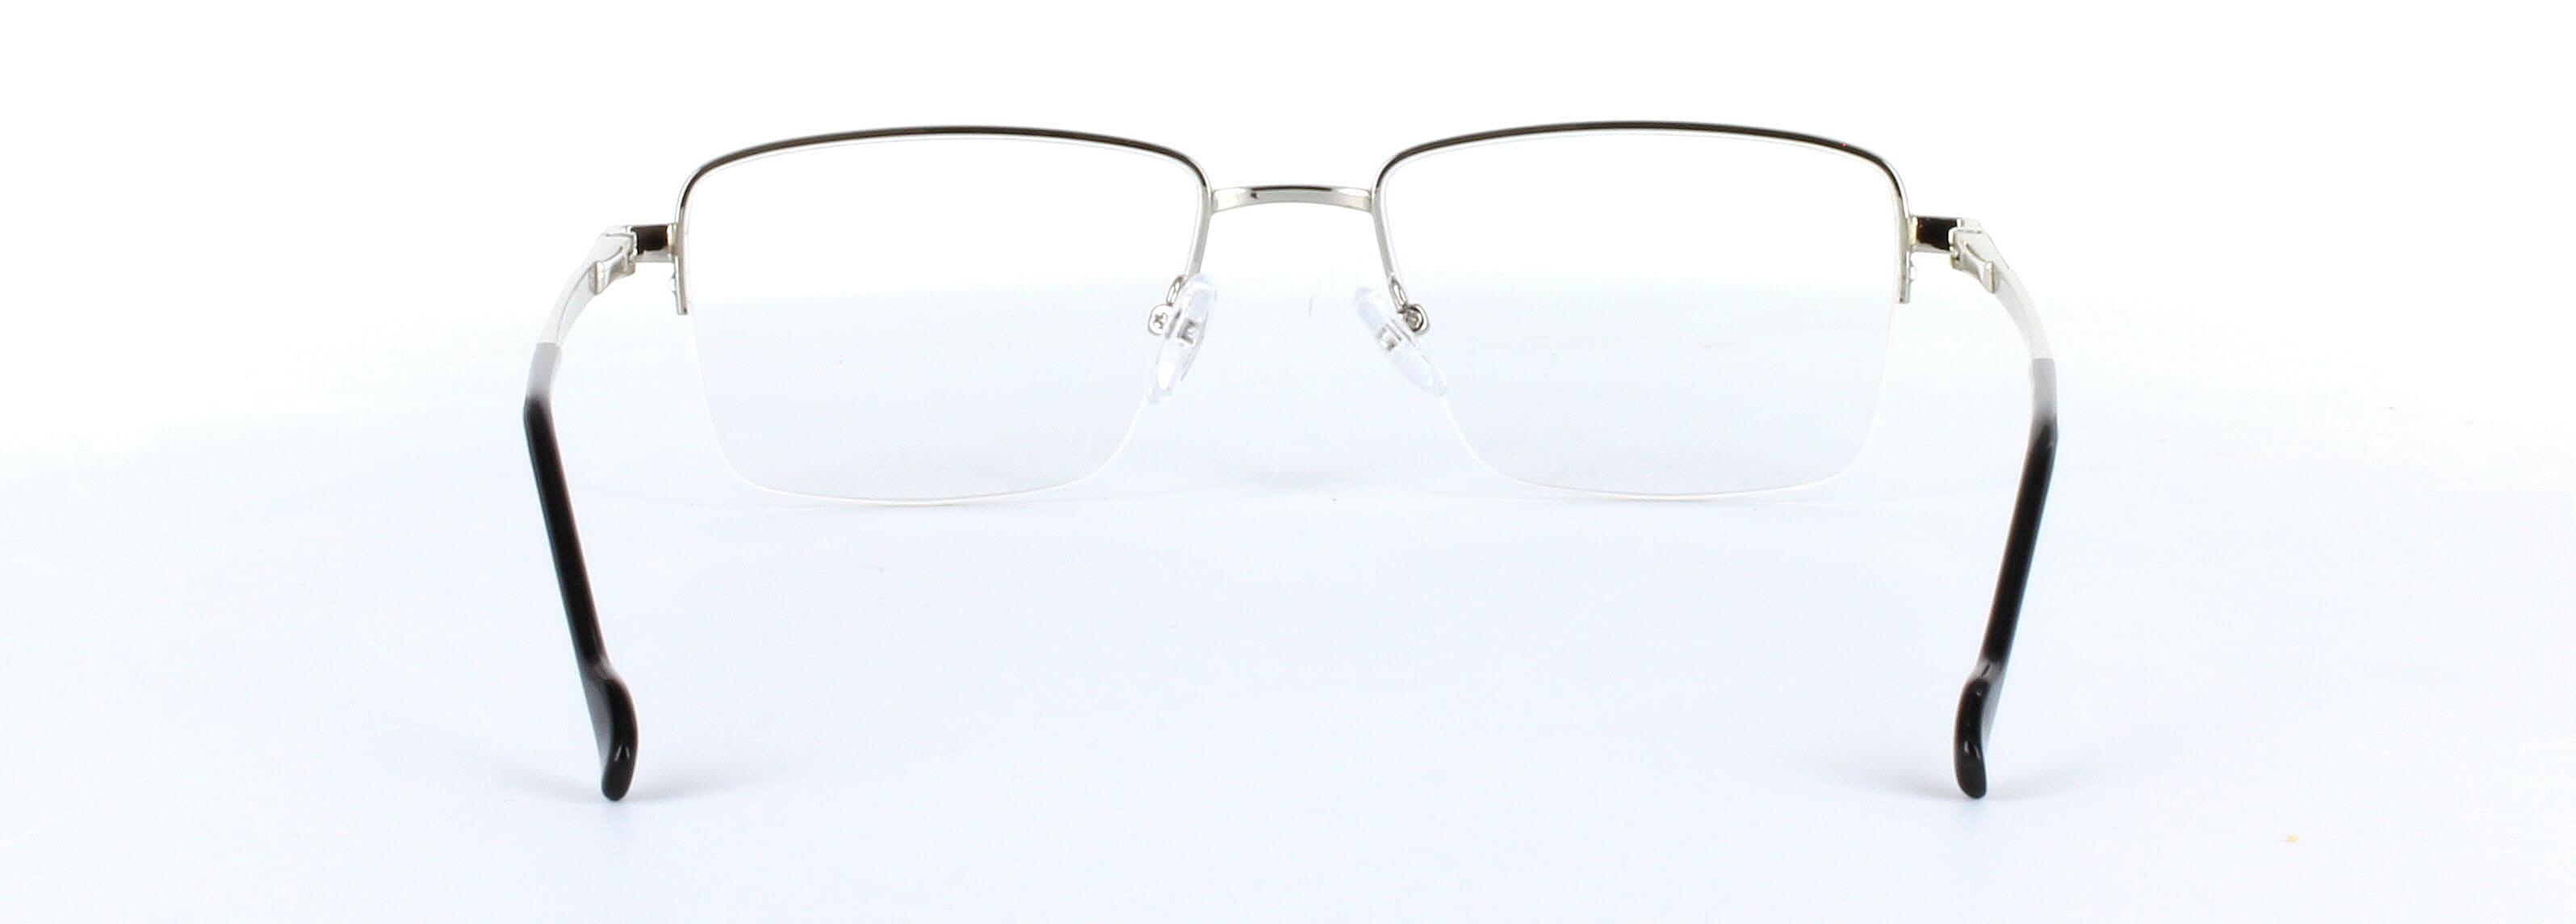 Miguel Silver Semi Rimless Metal Glasses - Image View 3